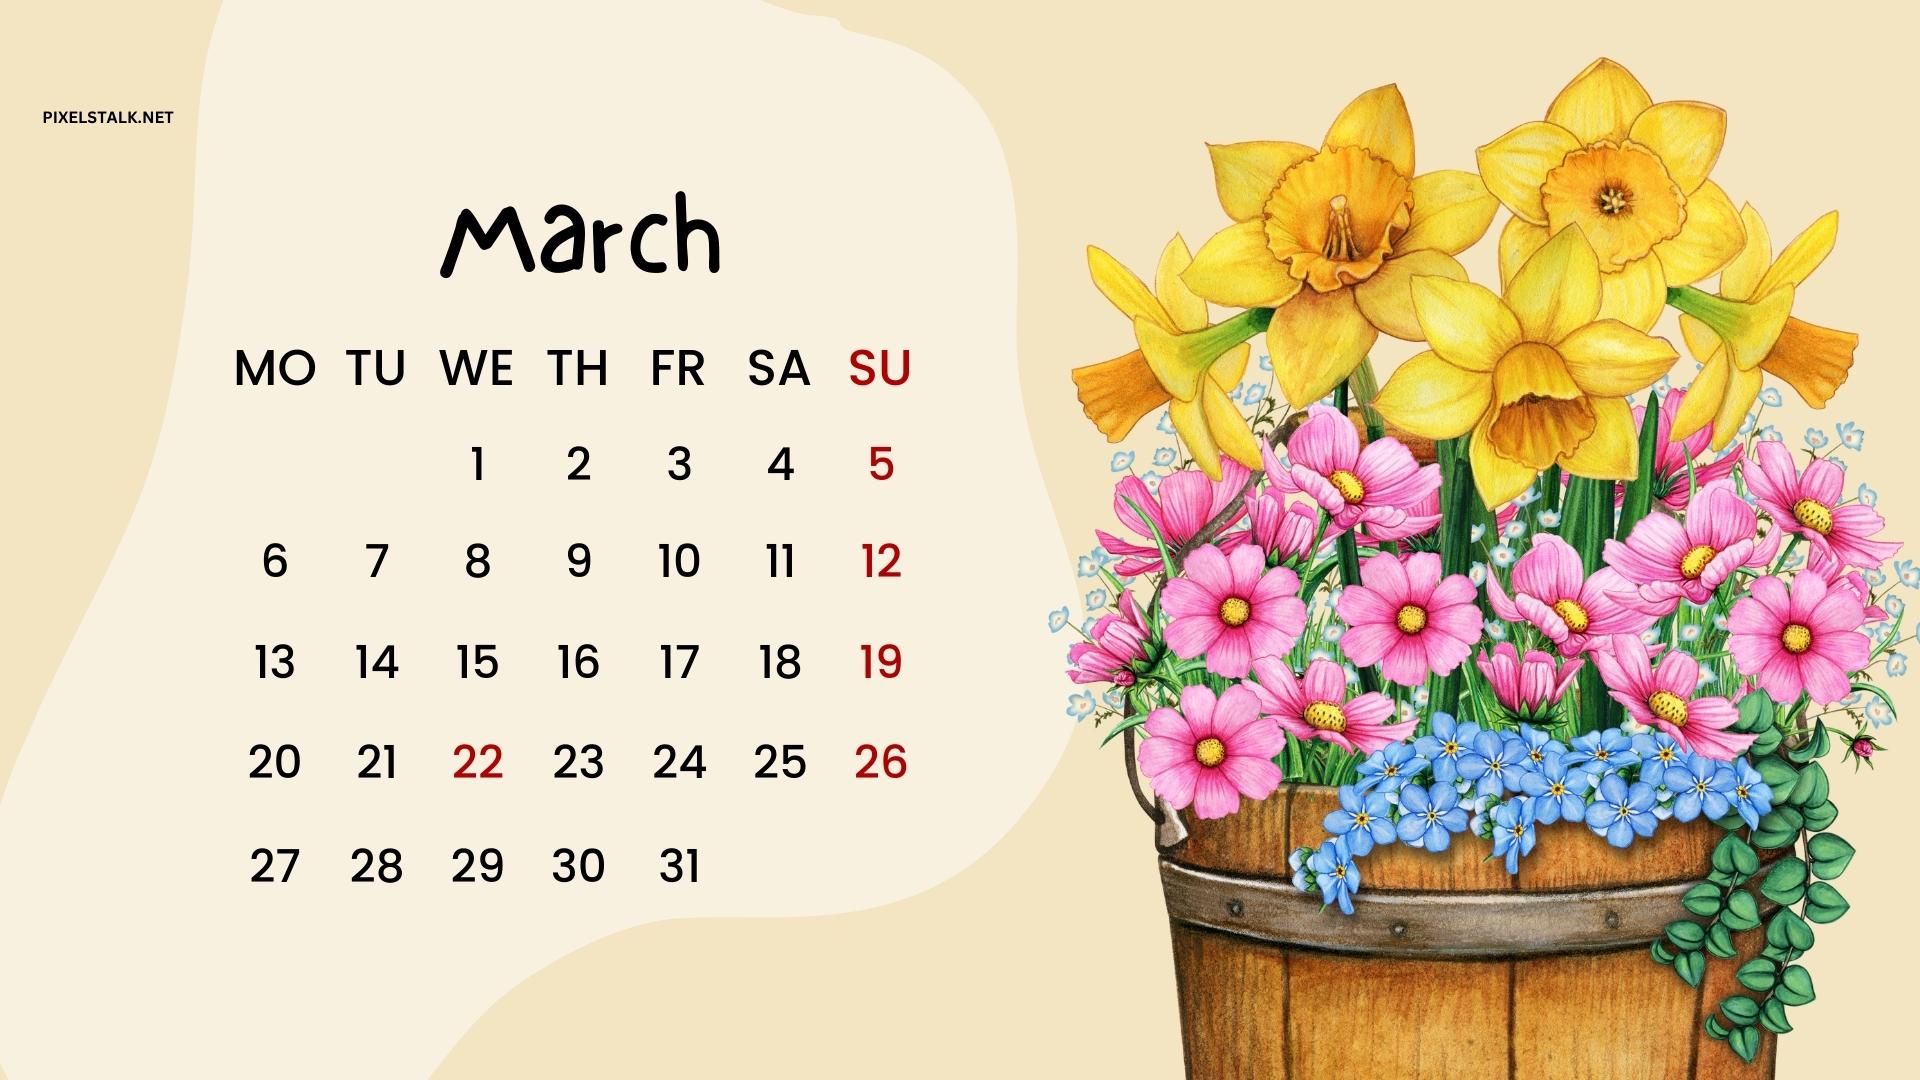 MARCH DIGITAL BLOOMS ROUNDUP  8 FREE TECH WALLPAPERS  JustineCelina